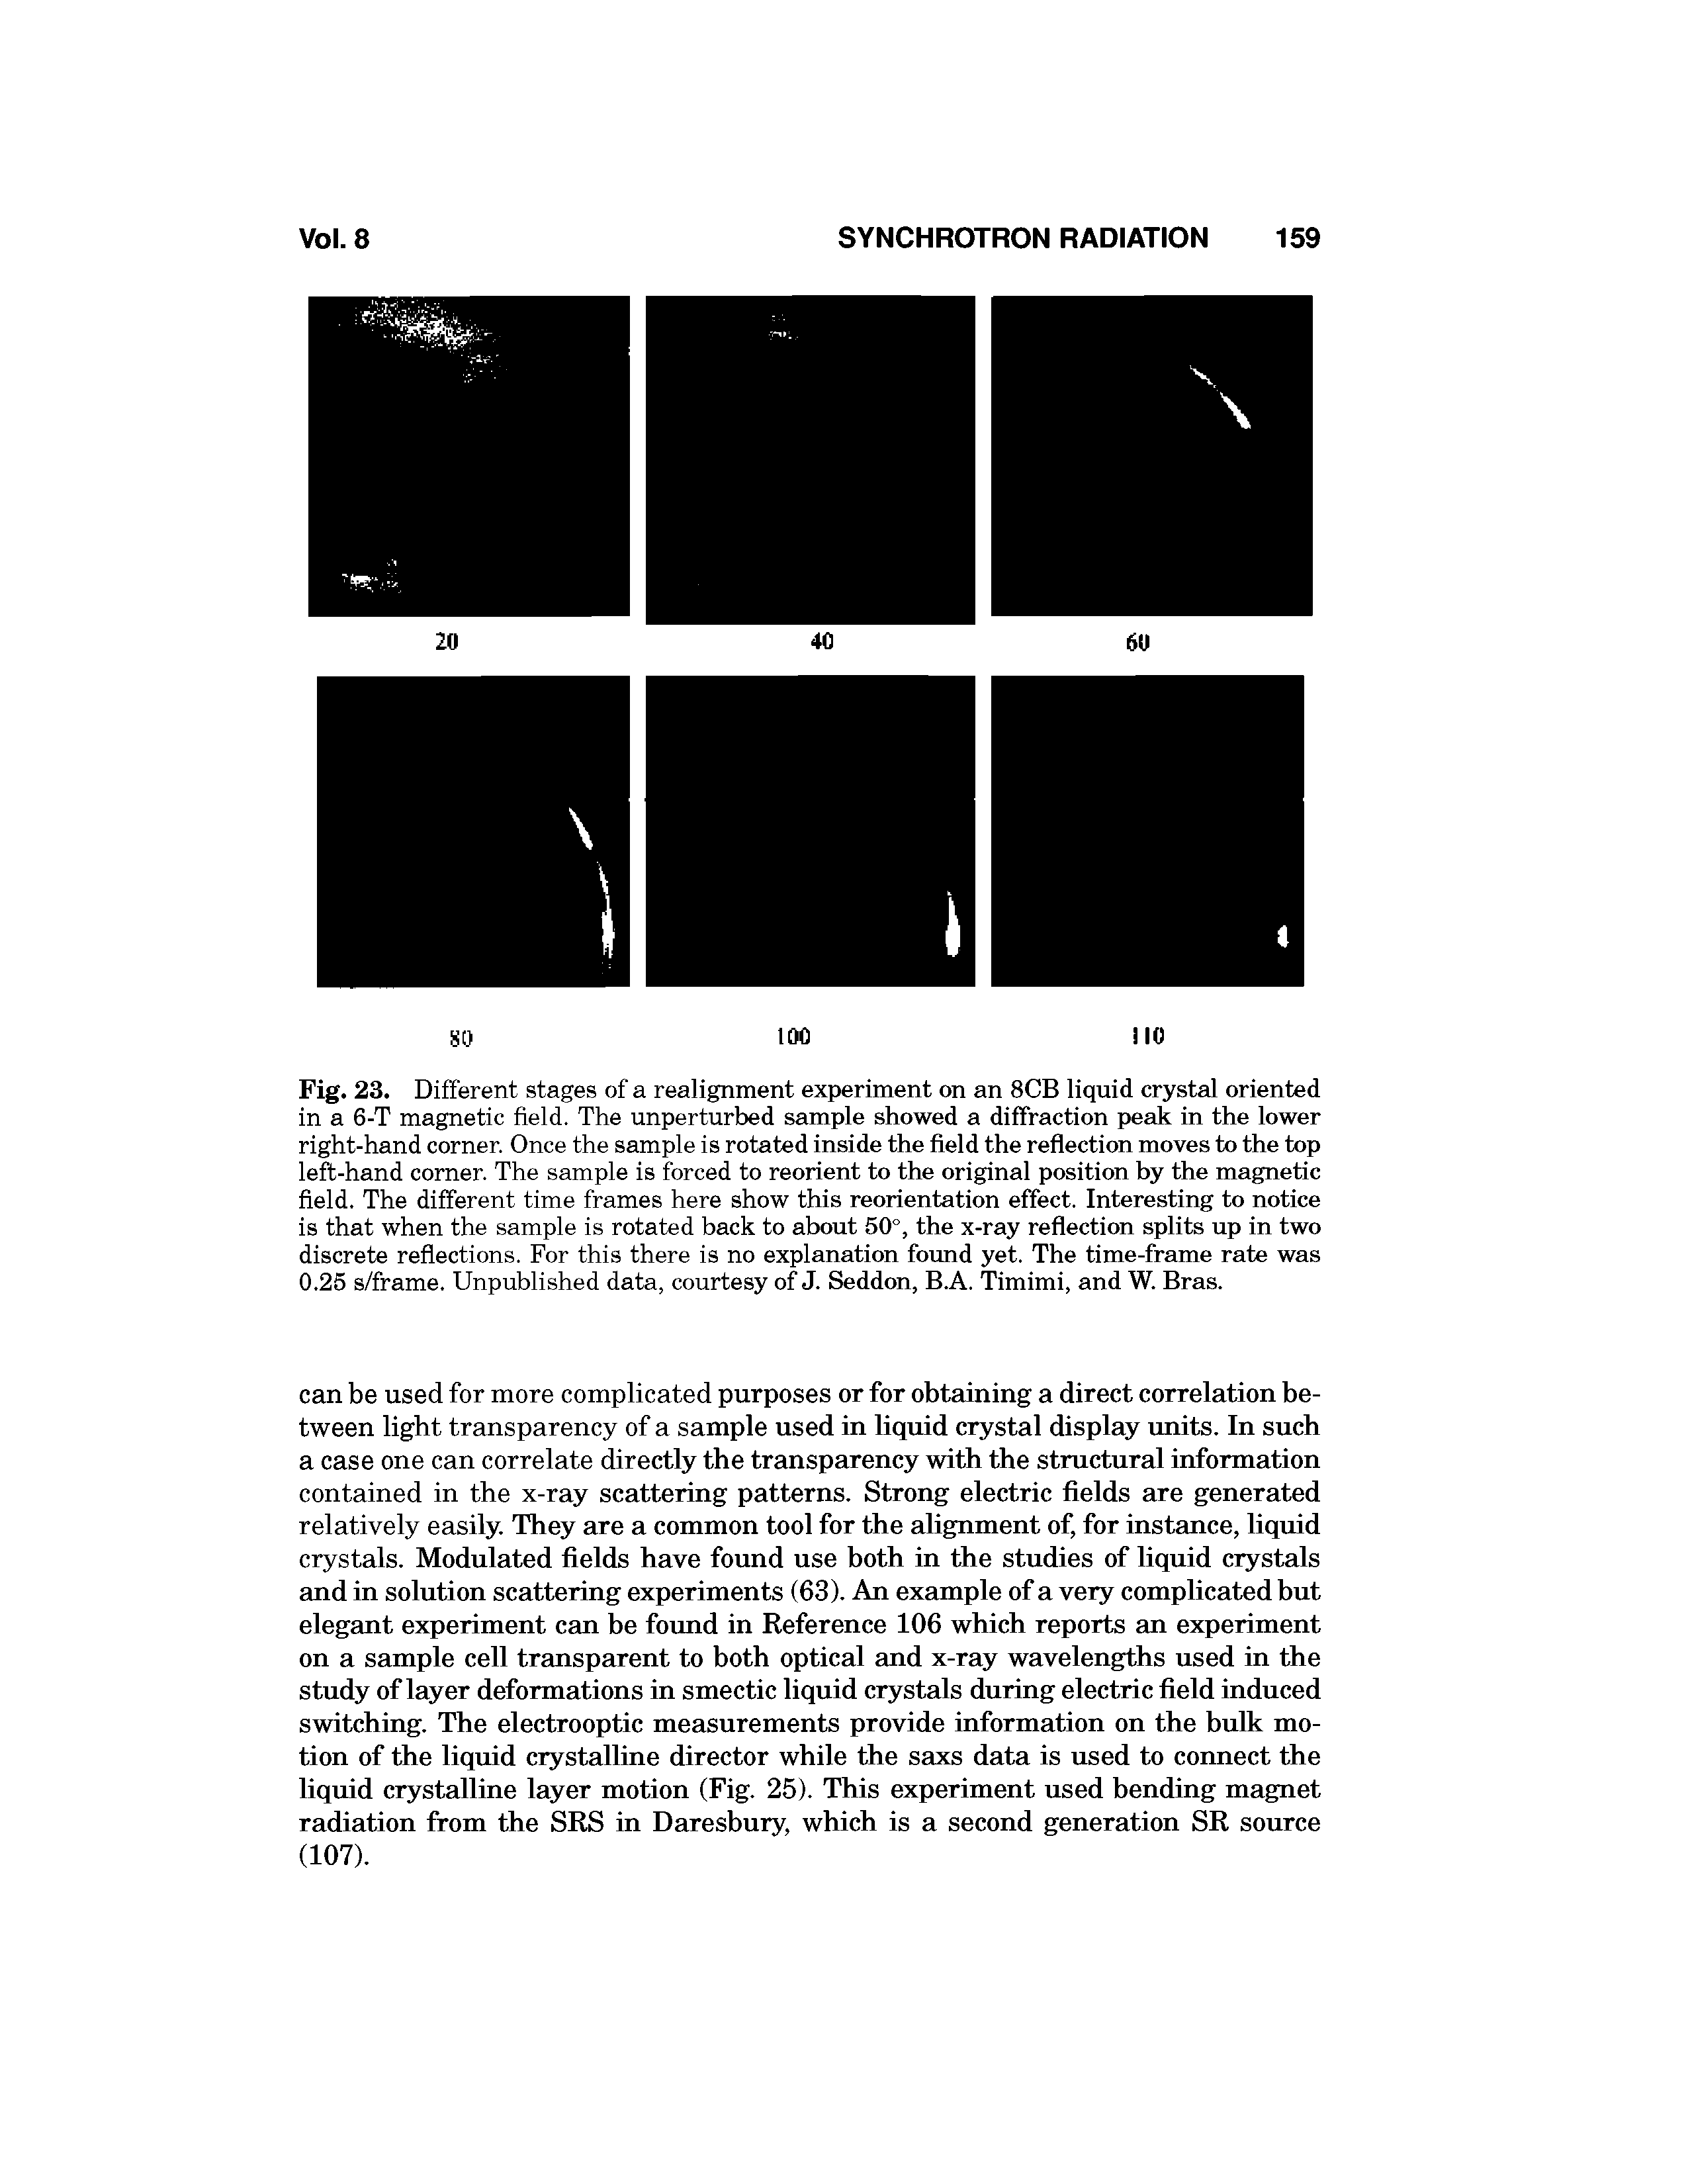 Fig. 23. Different stages of a realignment experiment on an 8CB liquid crystal oriented in a 6-T magnetic field. The unperturbed sample showed a diffraction peak in the lower right-hand corner. Once the sample is rotated inside the field the reflection moves to the top left-hand corner. The sample is forced to reorient to the original position by the magnetic field. The different time frames here show this reorientation effect. Interesting to notice is that when the sample is rotated back to about 50°, the x-ray reflection splits up in two discrete reflections. For this there is no explanation found yet. The time-frame rate was 0.25 s/frame. Unpublished data, courtesy of J. Seddon, B.A. Timimi, and W. Bras.